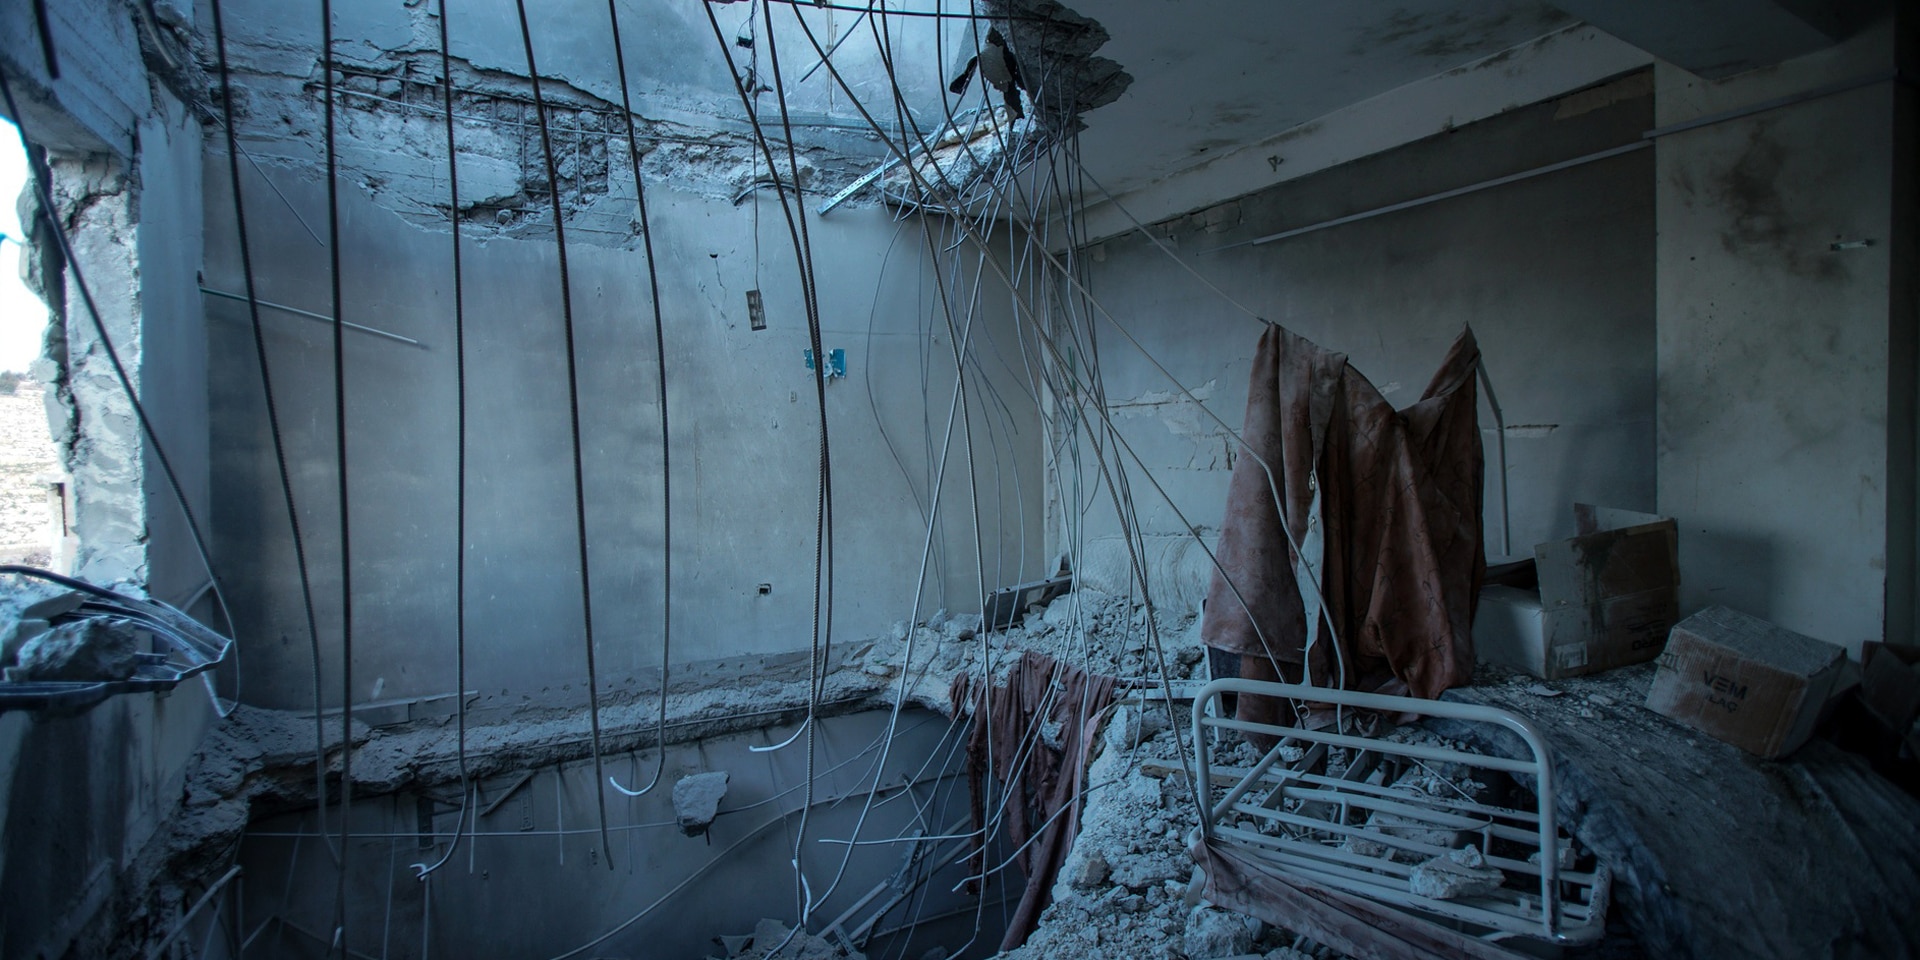 A destroyed hospital room in Syria after a attack.